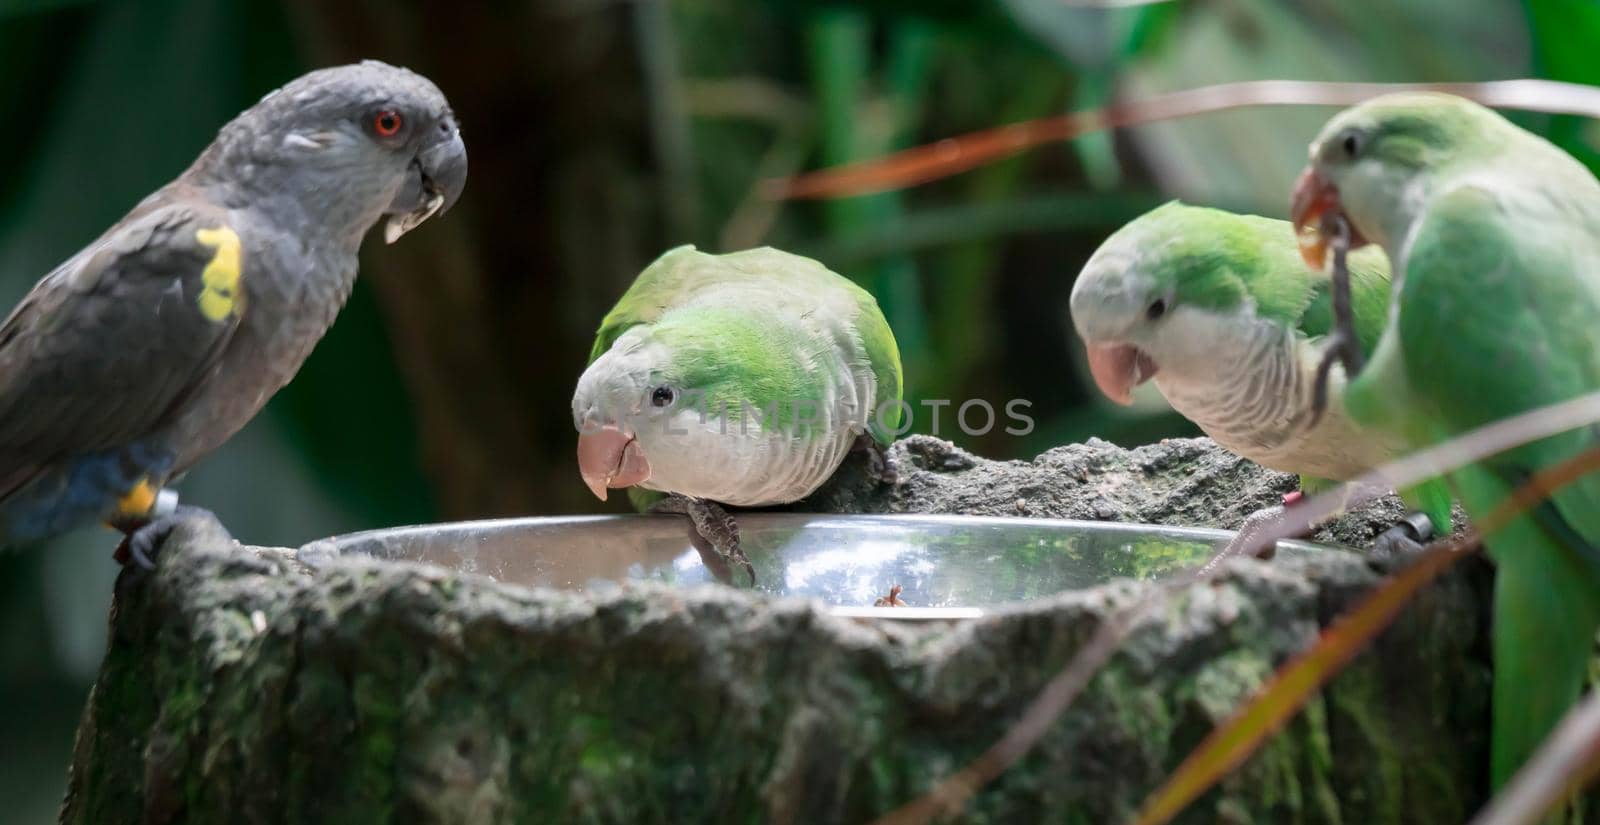 Flock of monk parakeet (Myiopsitta monachus), also known as the Quaker parrot while eating